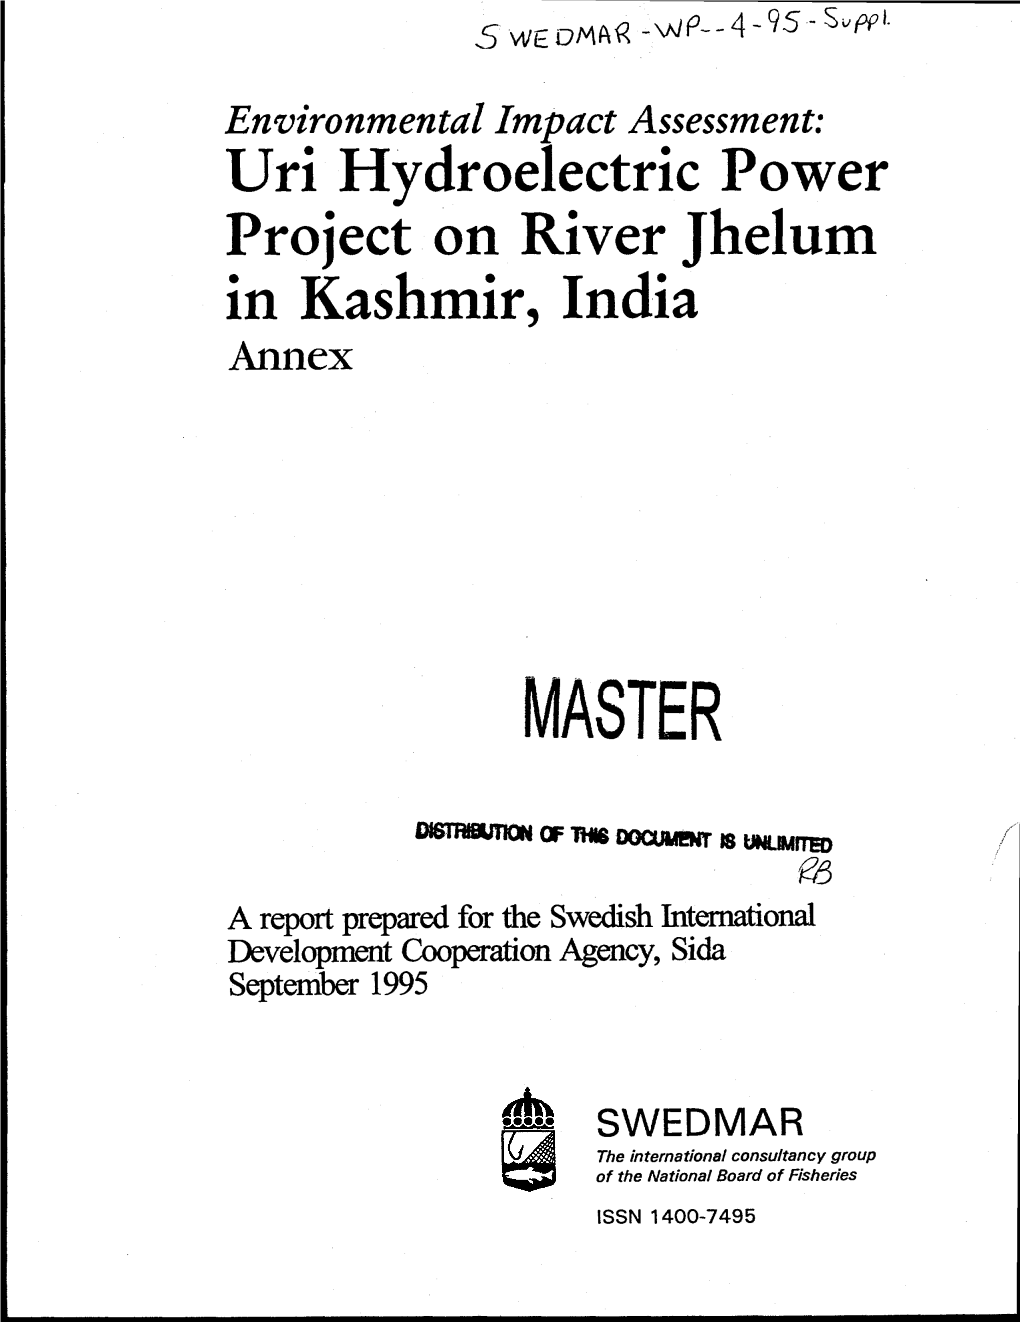 Environmental Impact Assessment: Uri Hydroelectric Power Project on River Jhelum in Kashmir, India Annex